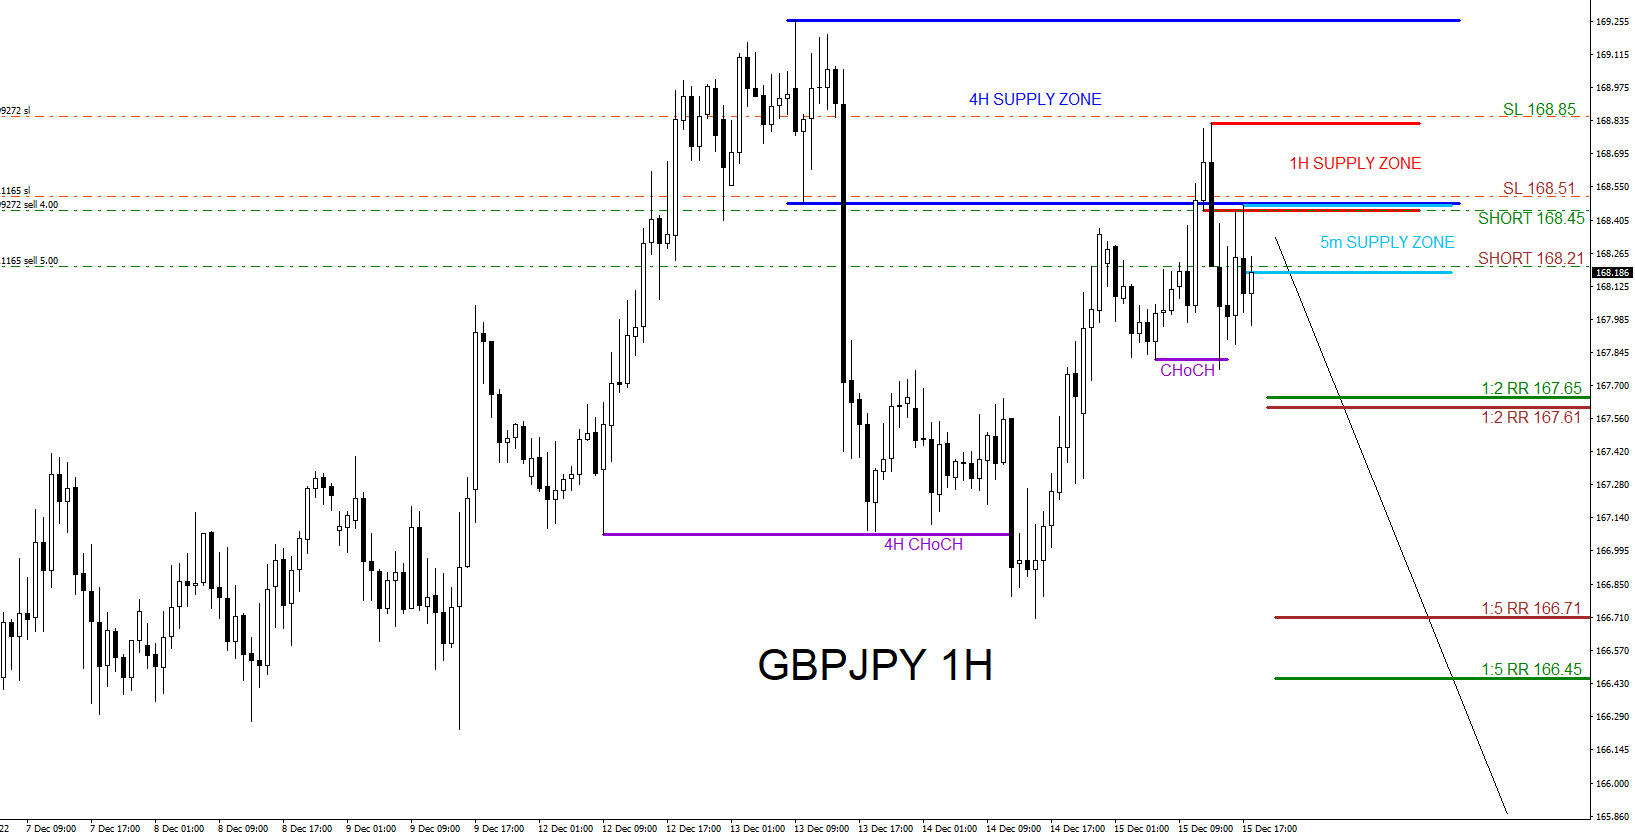 GBPJPY : 2 Sell Trades Hits Targets